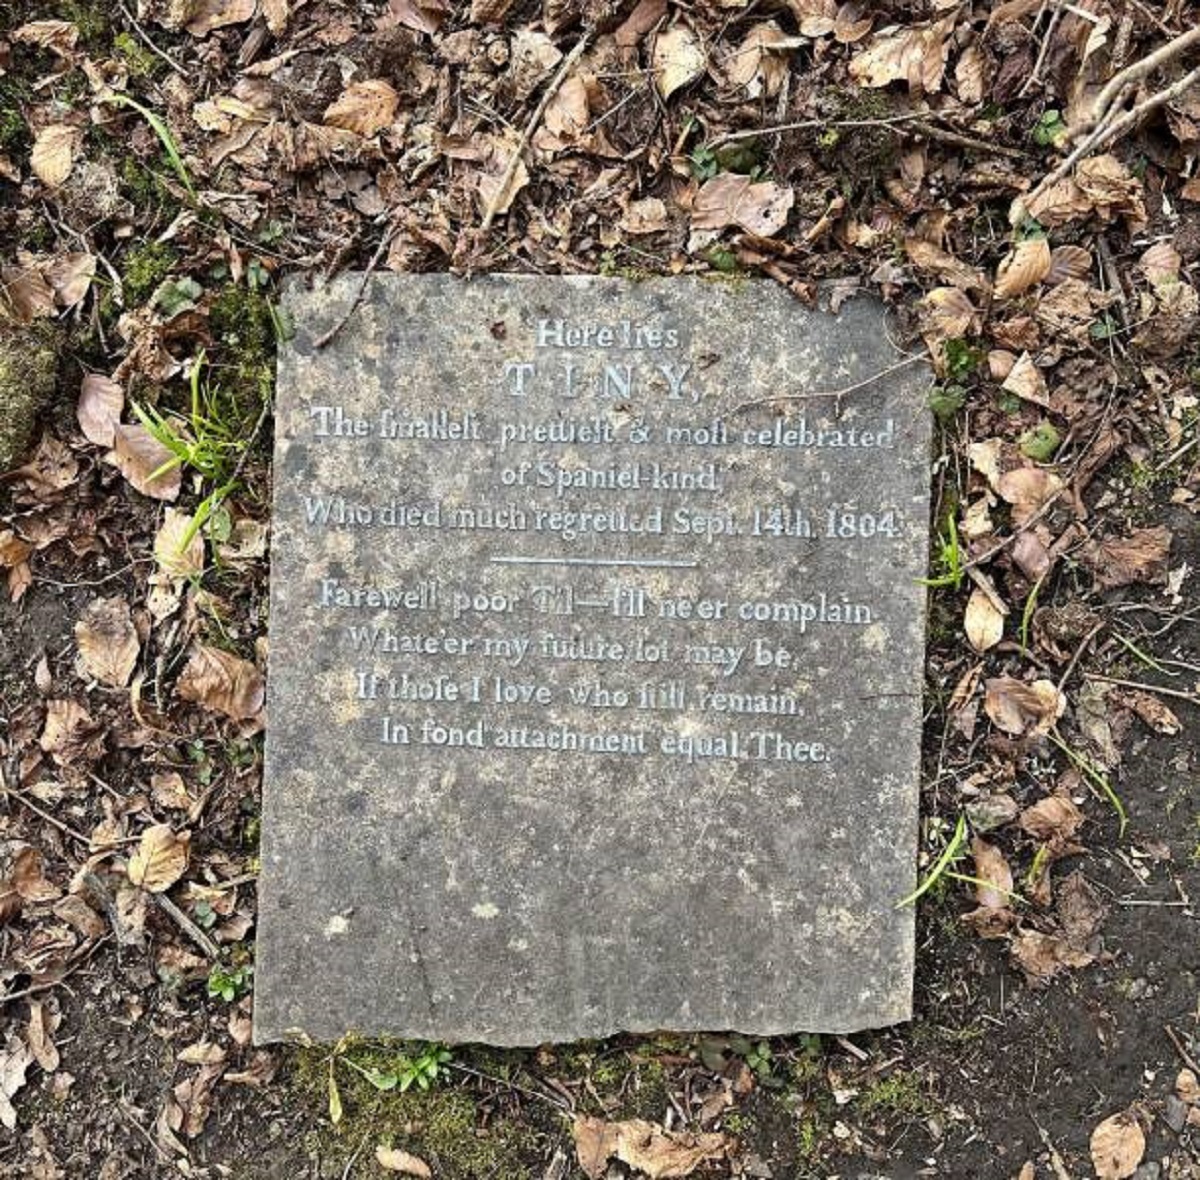 headstone - Here lies Tiny The brakelt prett & roll celebrated of Spaniel kind Who died much regretted Sept 14th 1804 Farewell poor T1ll ne er complain Whate'er my future lot may be, Hthole I love who fili Temam In fond attachident equal. Thee